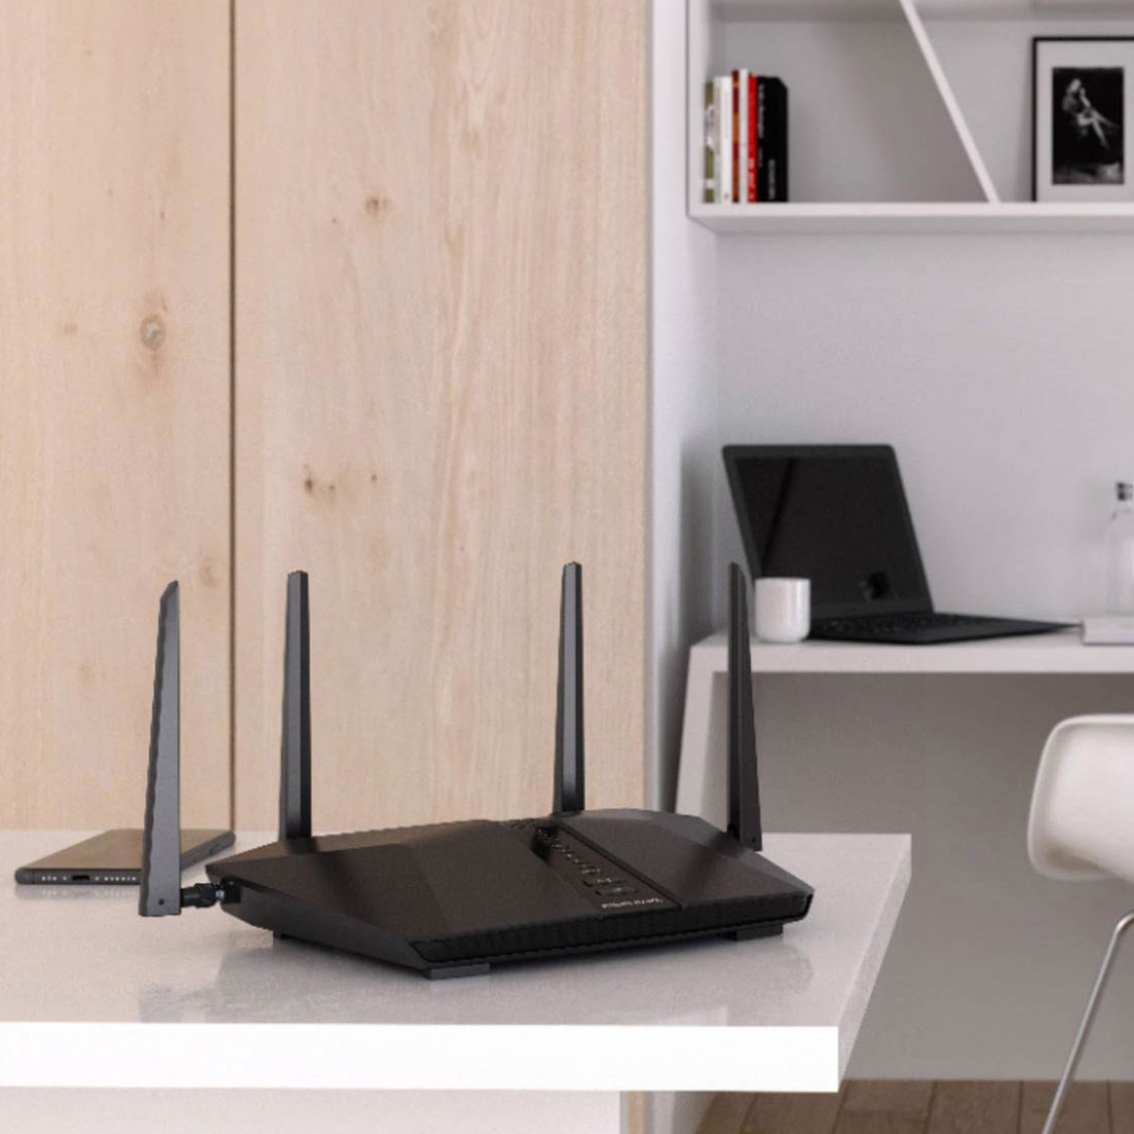 Netgear Nighthawk AX5400 Dual Band Wireless and Ethernet Router - Image 5 of 5